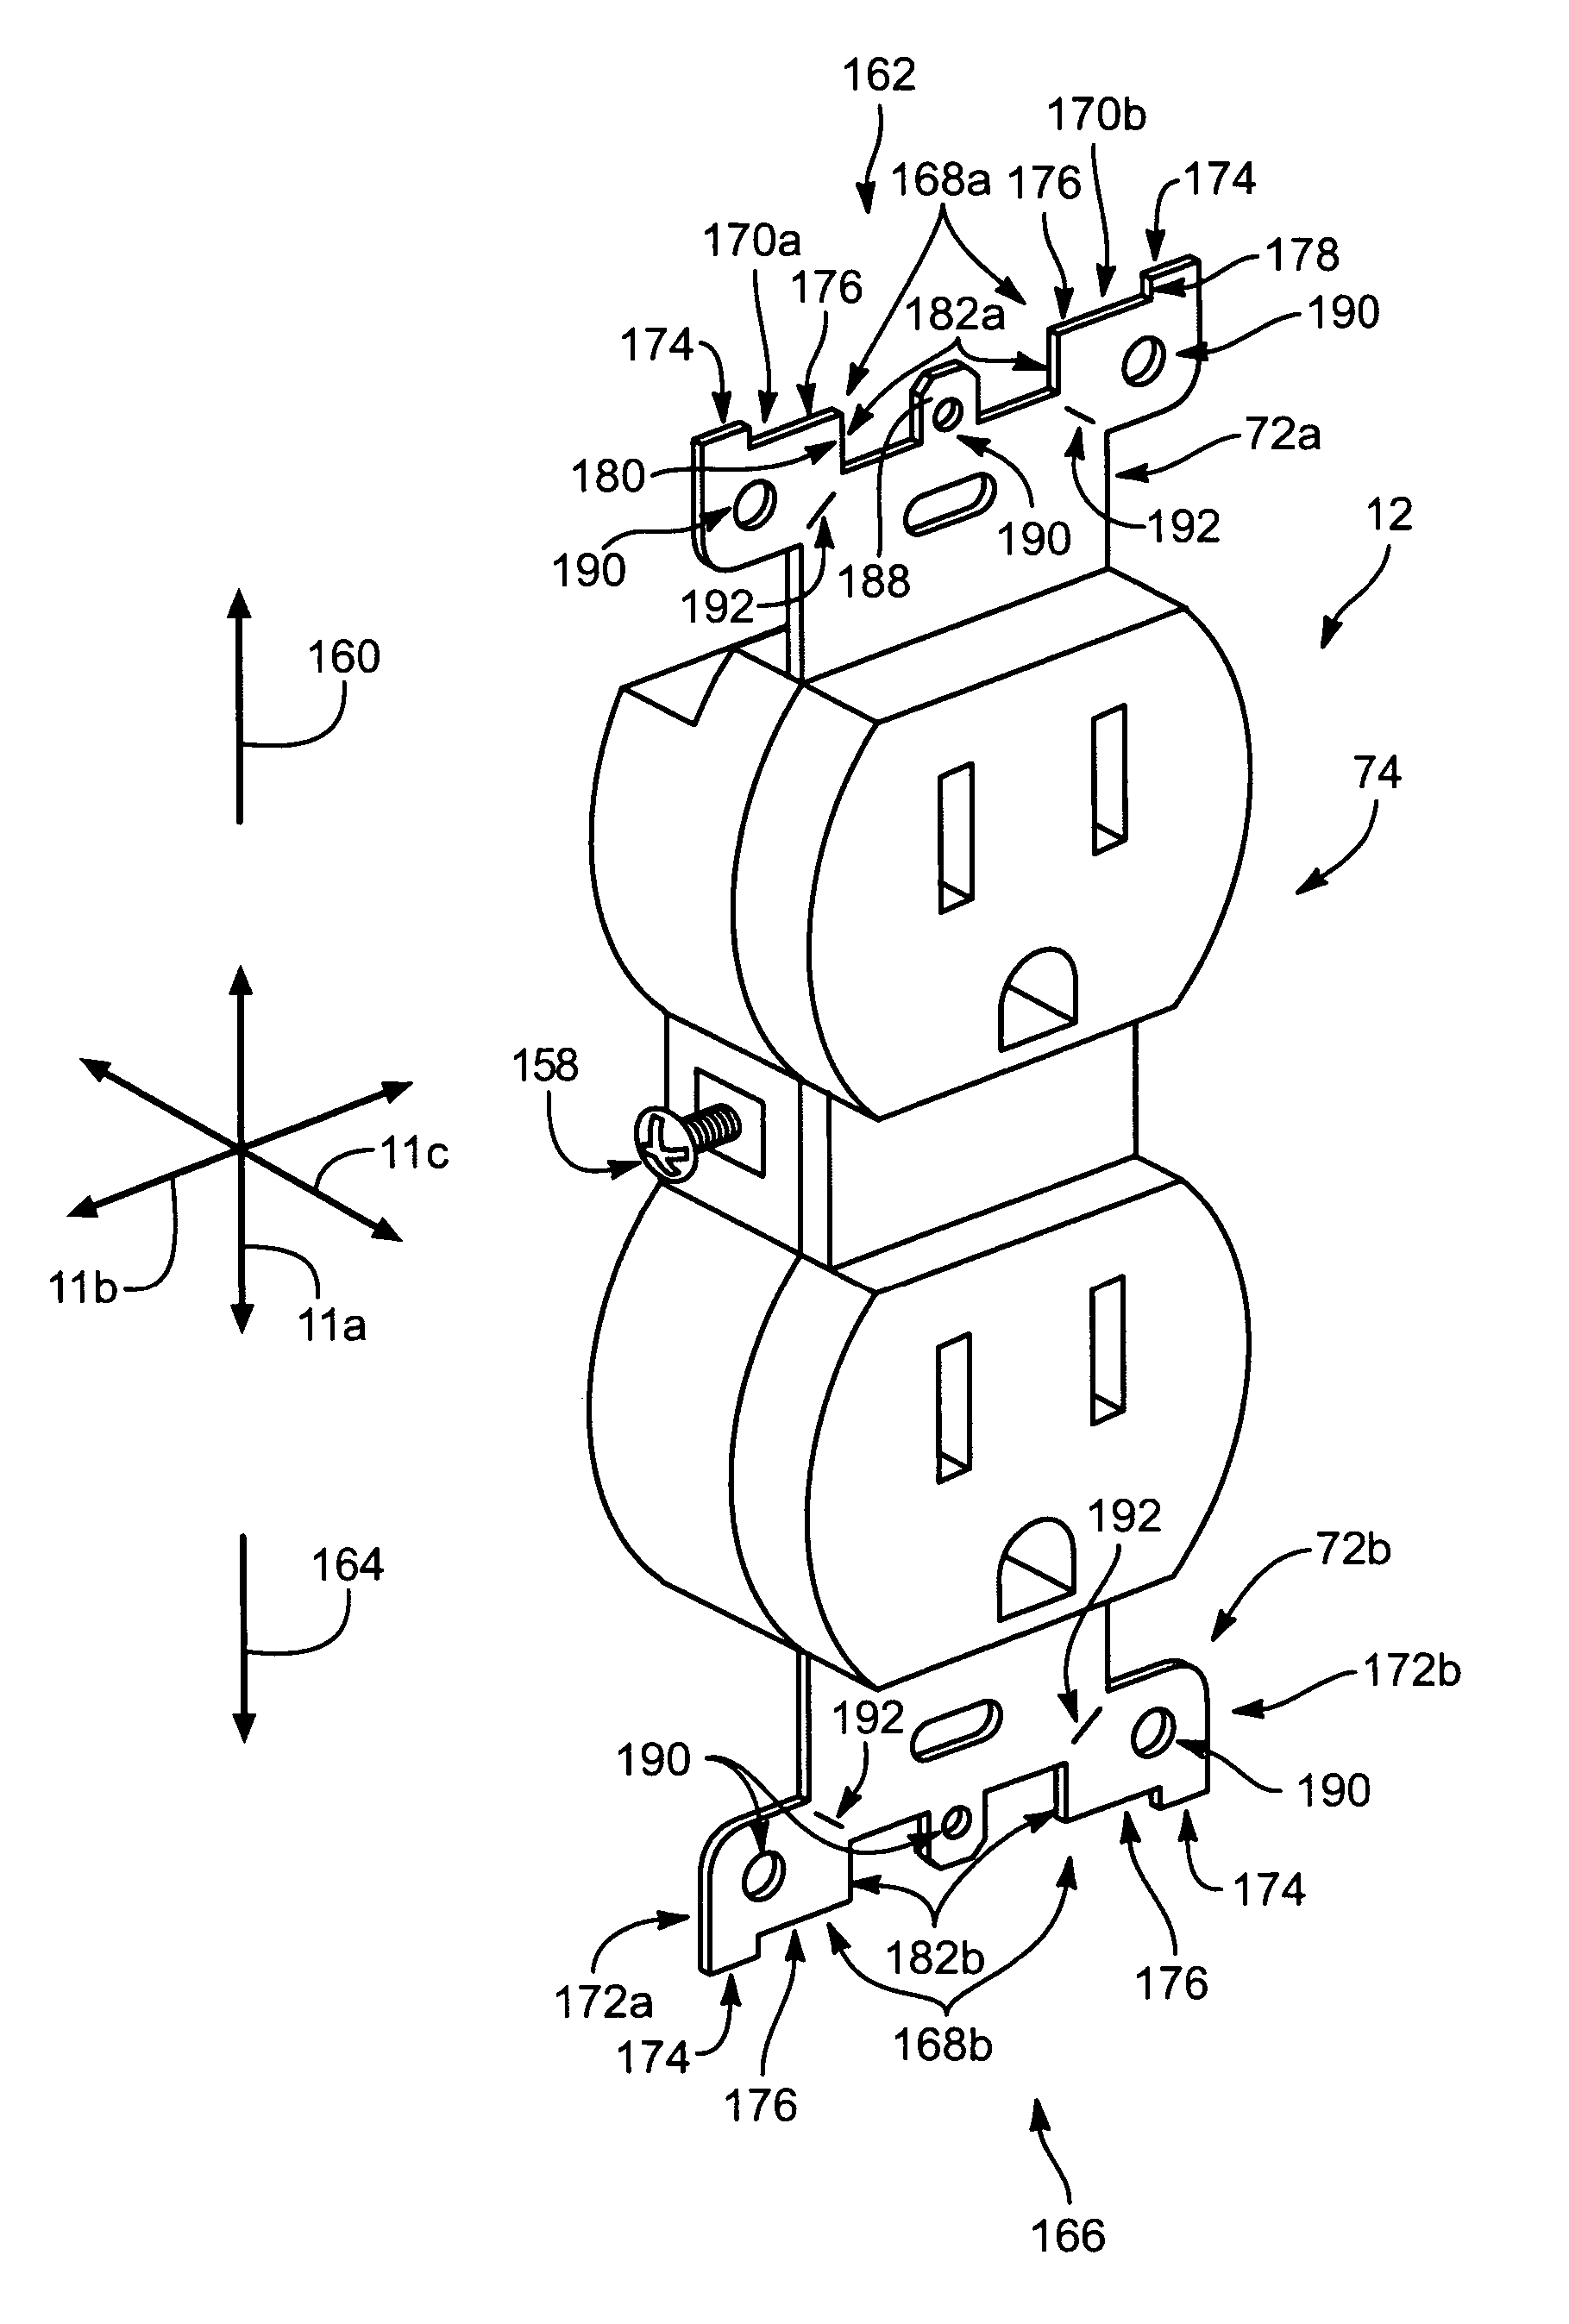 Clip-on face plate for electrical fixtures